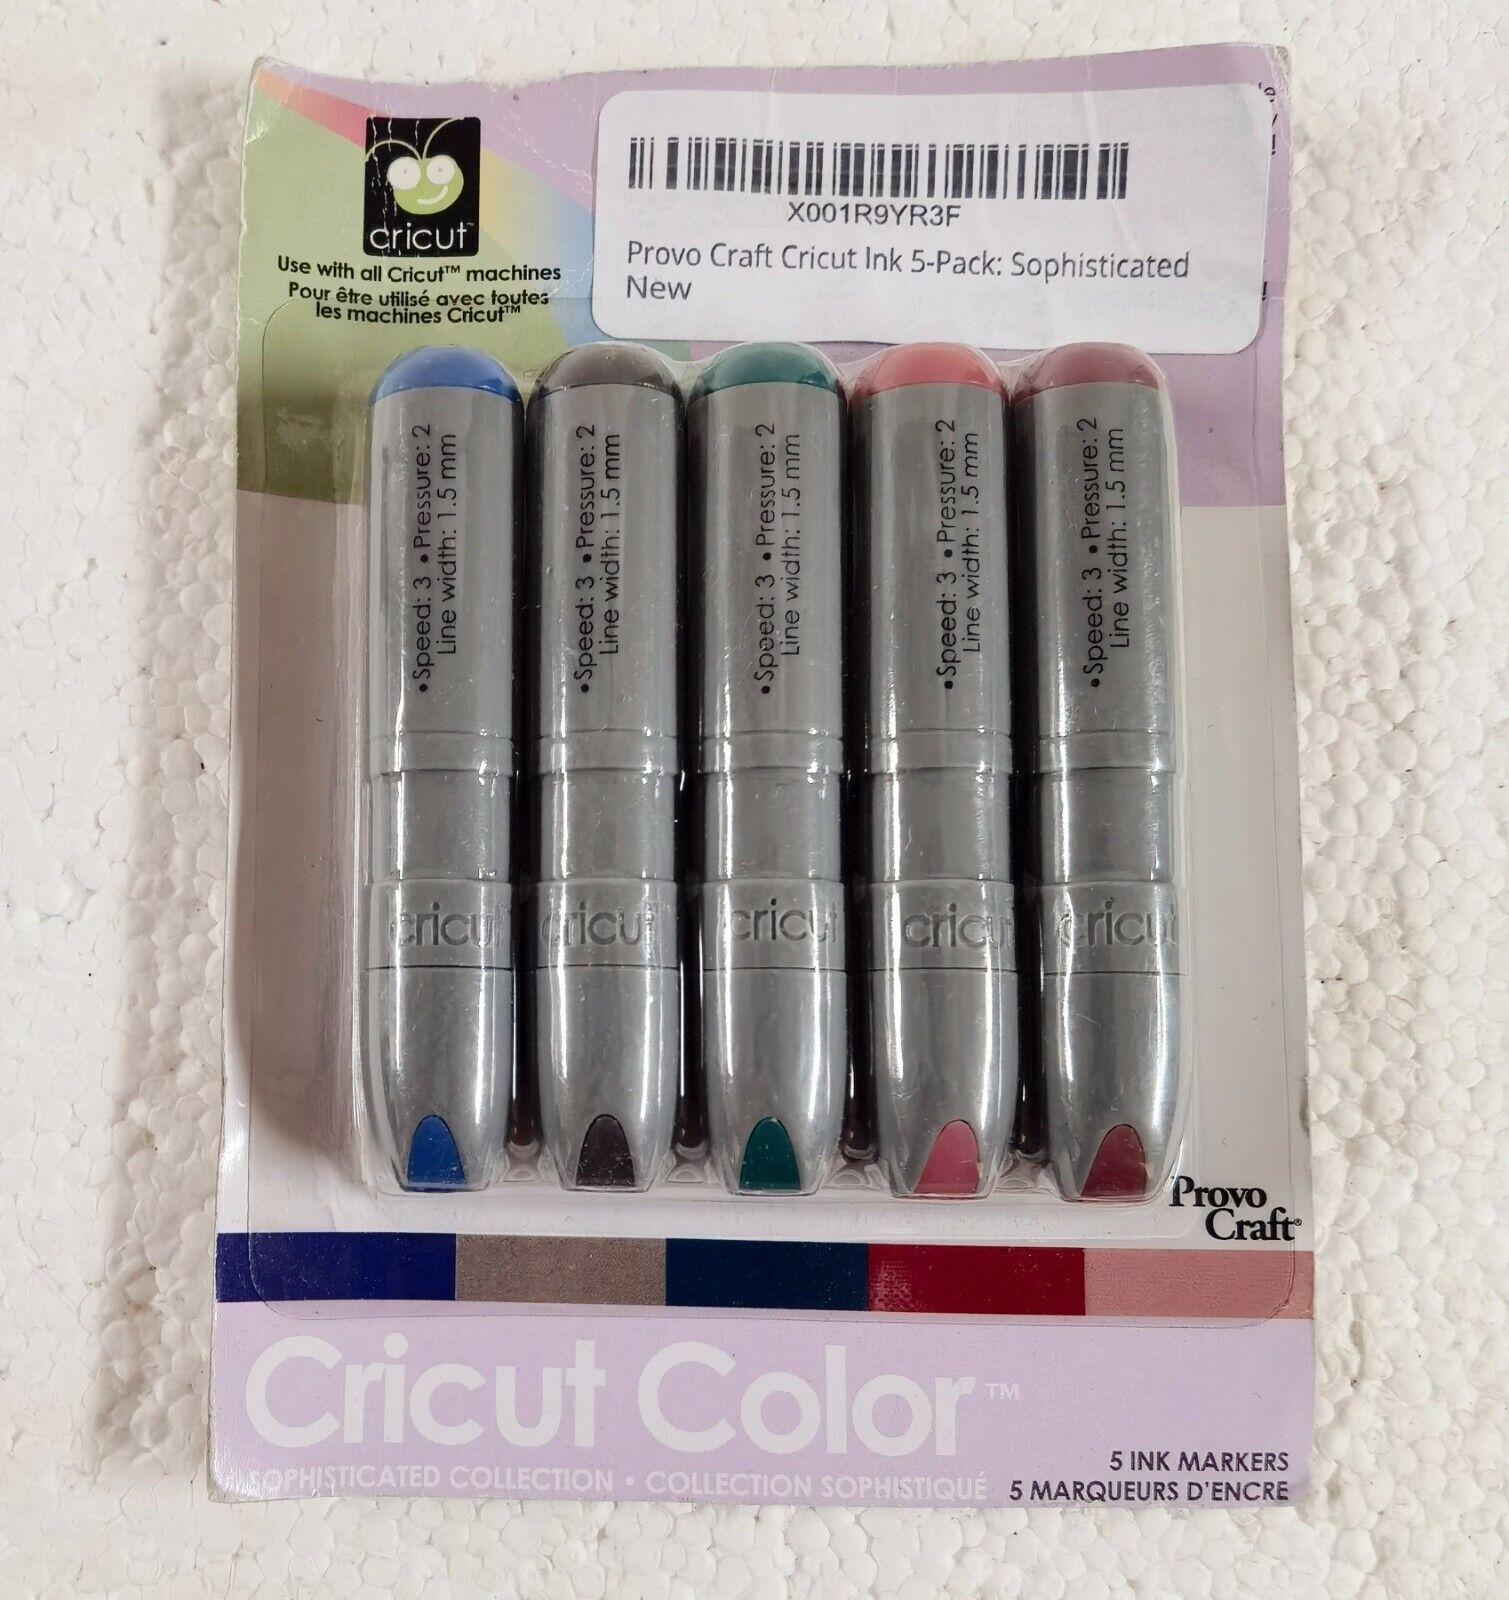 Provo Craft Cricut Ink 5-Pack: Sophisticated